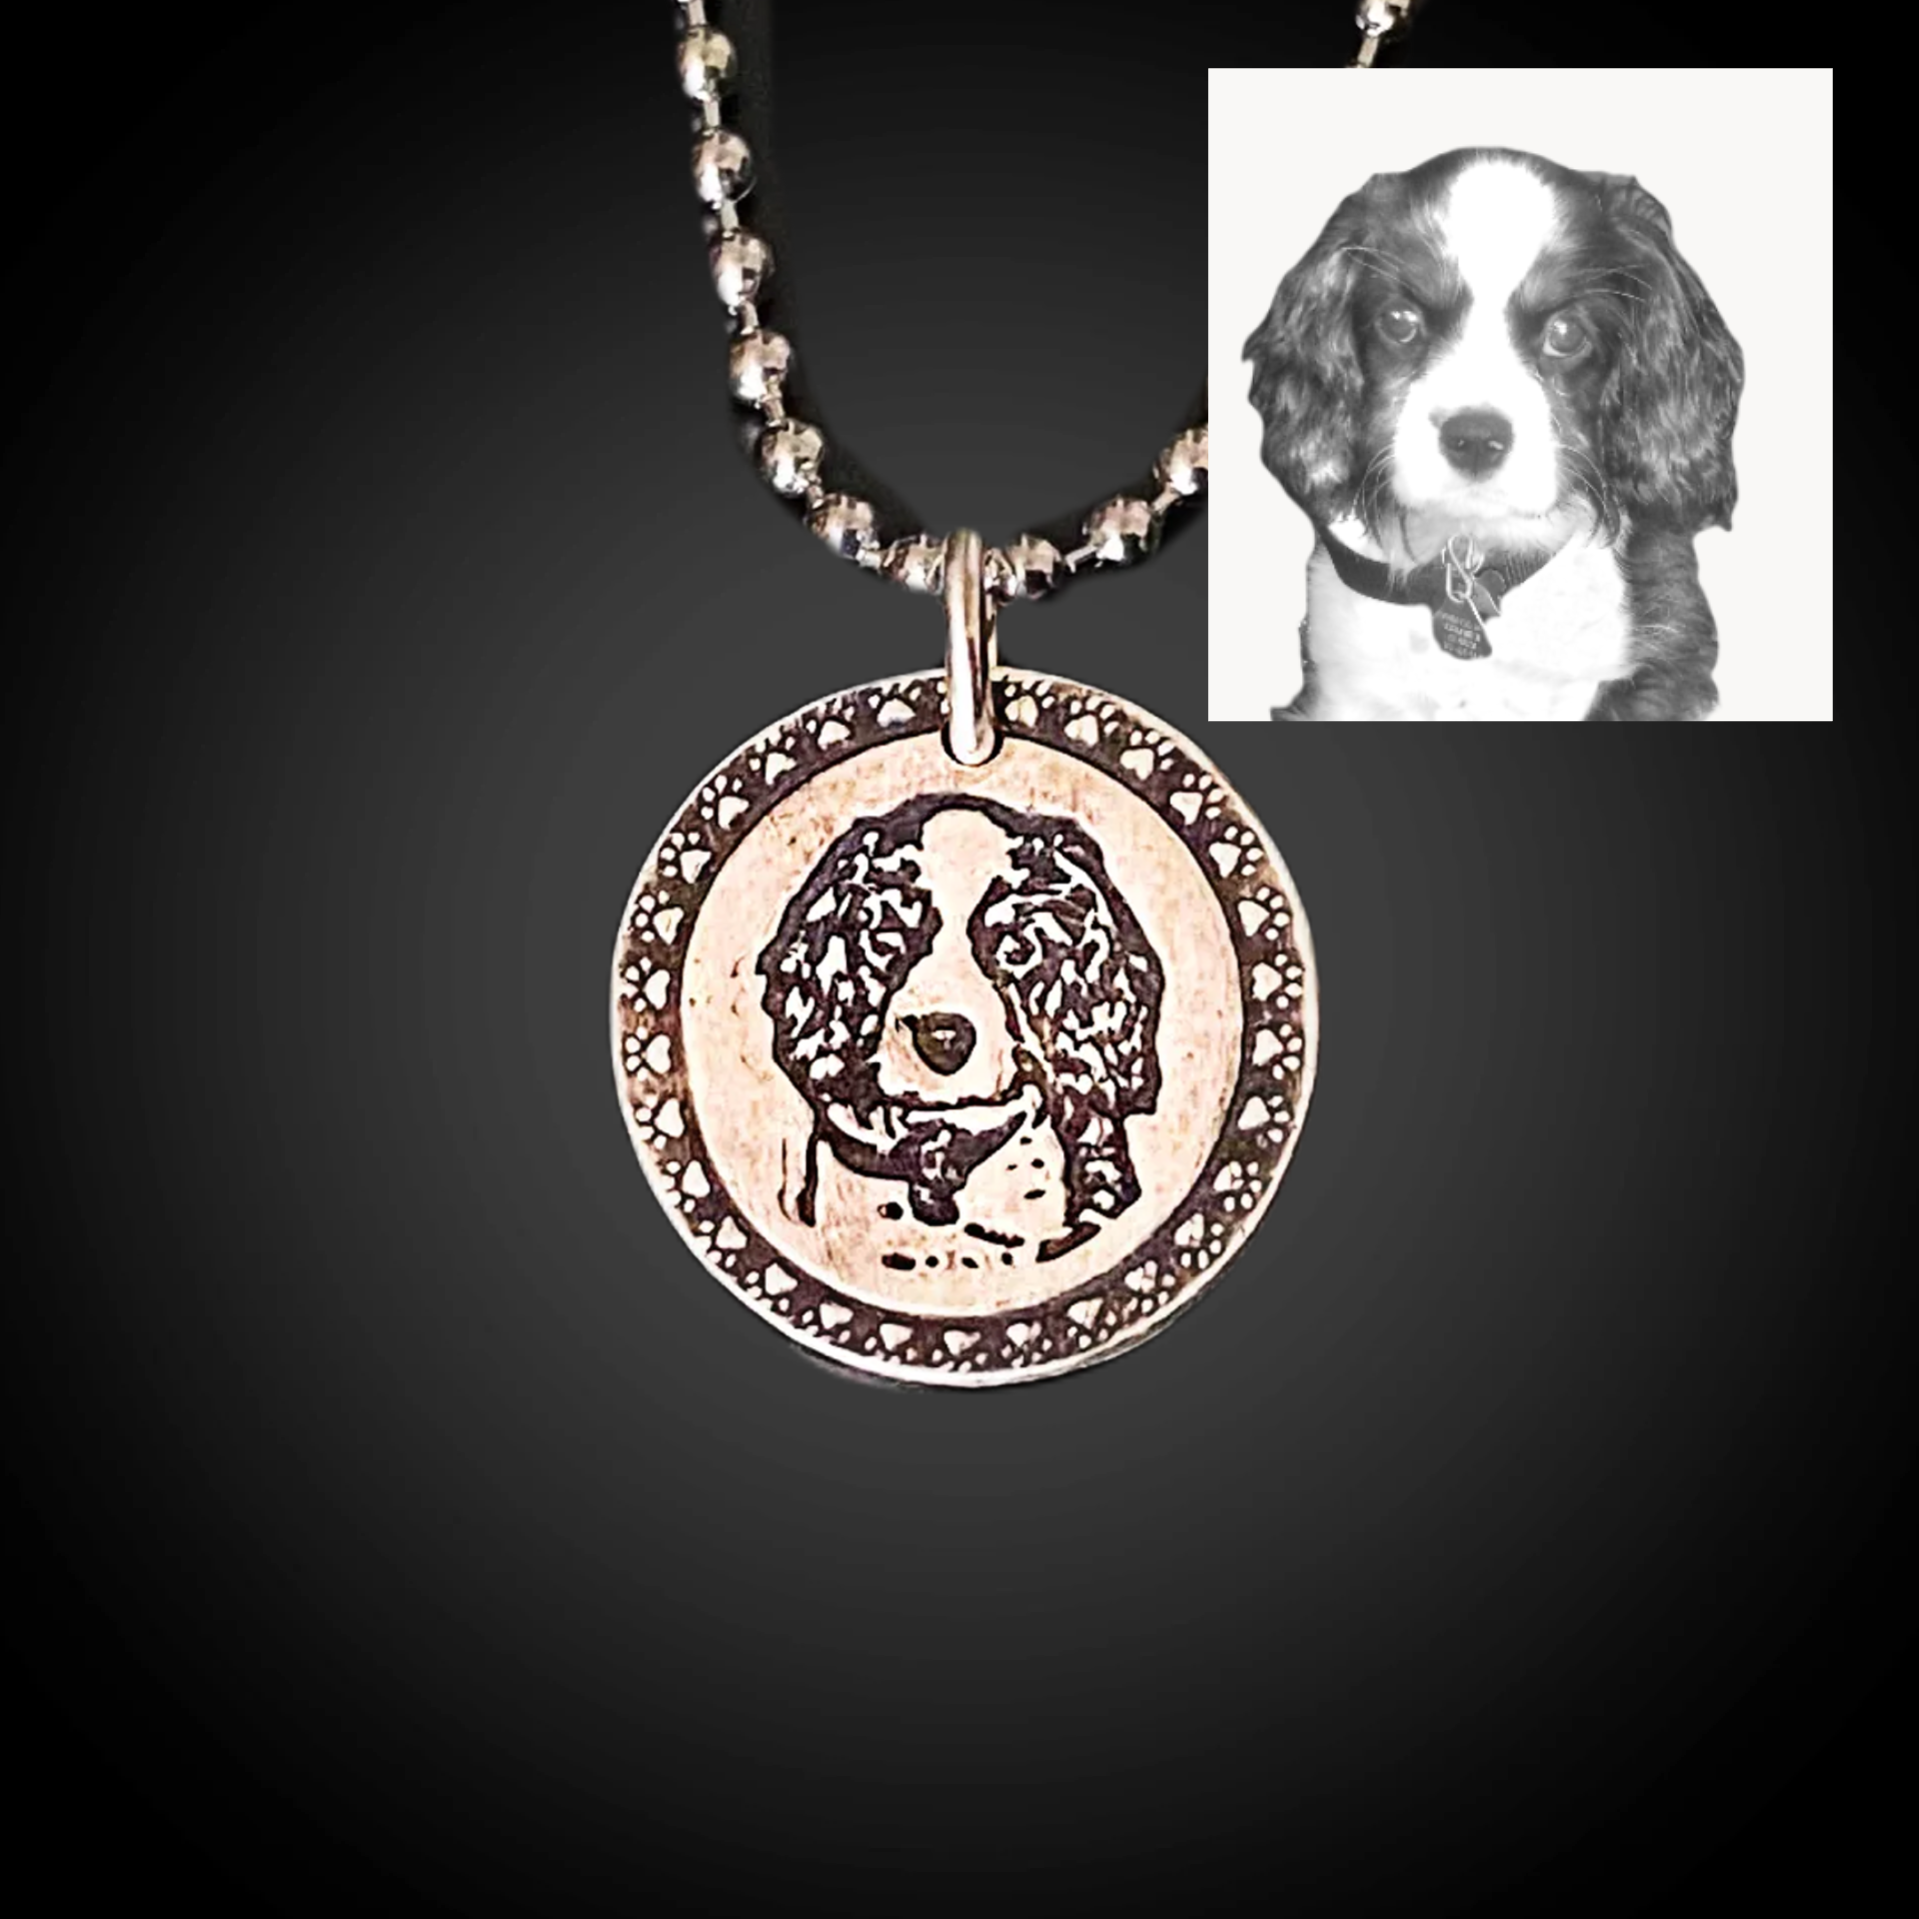 dog pet photo reproduced on sterling silver memorial necklace